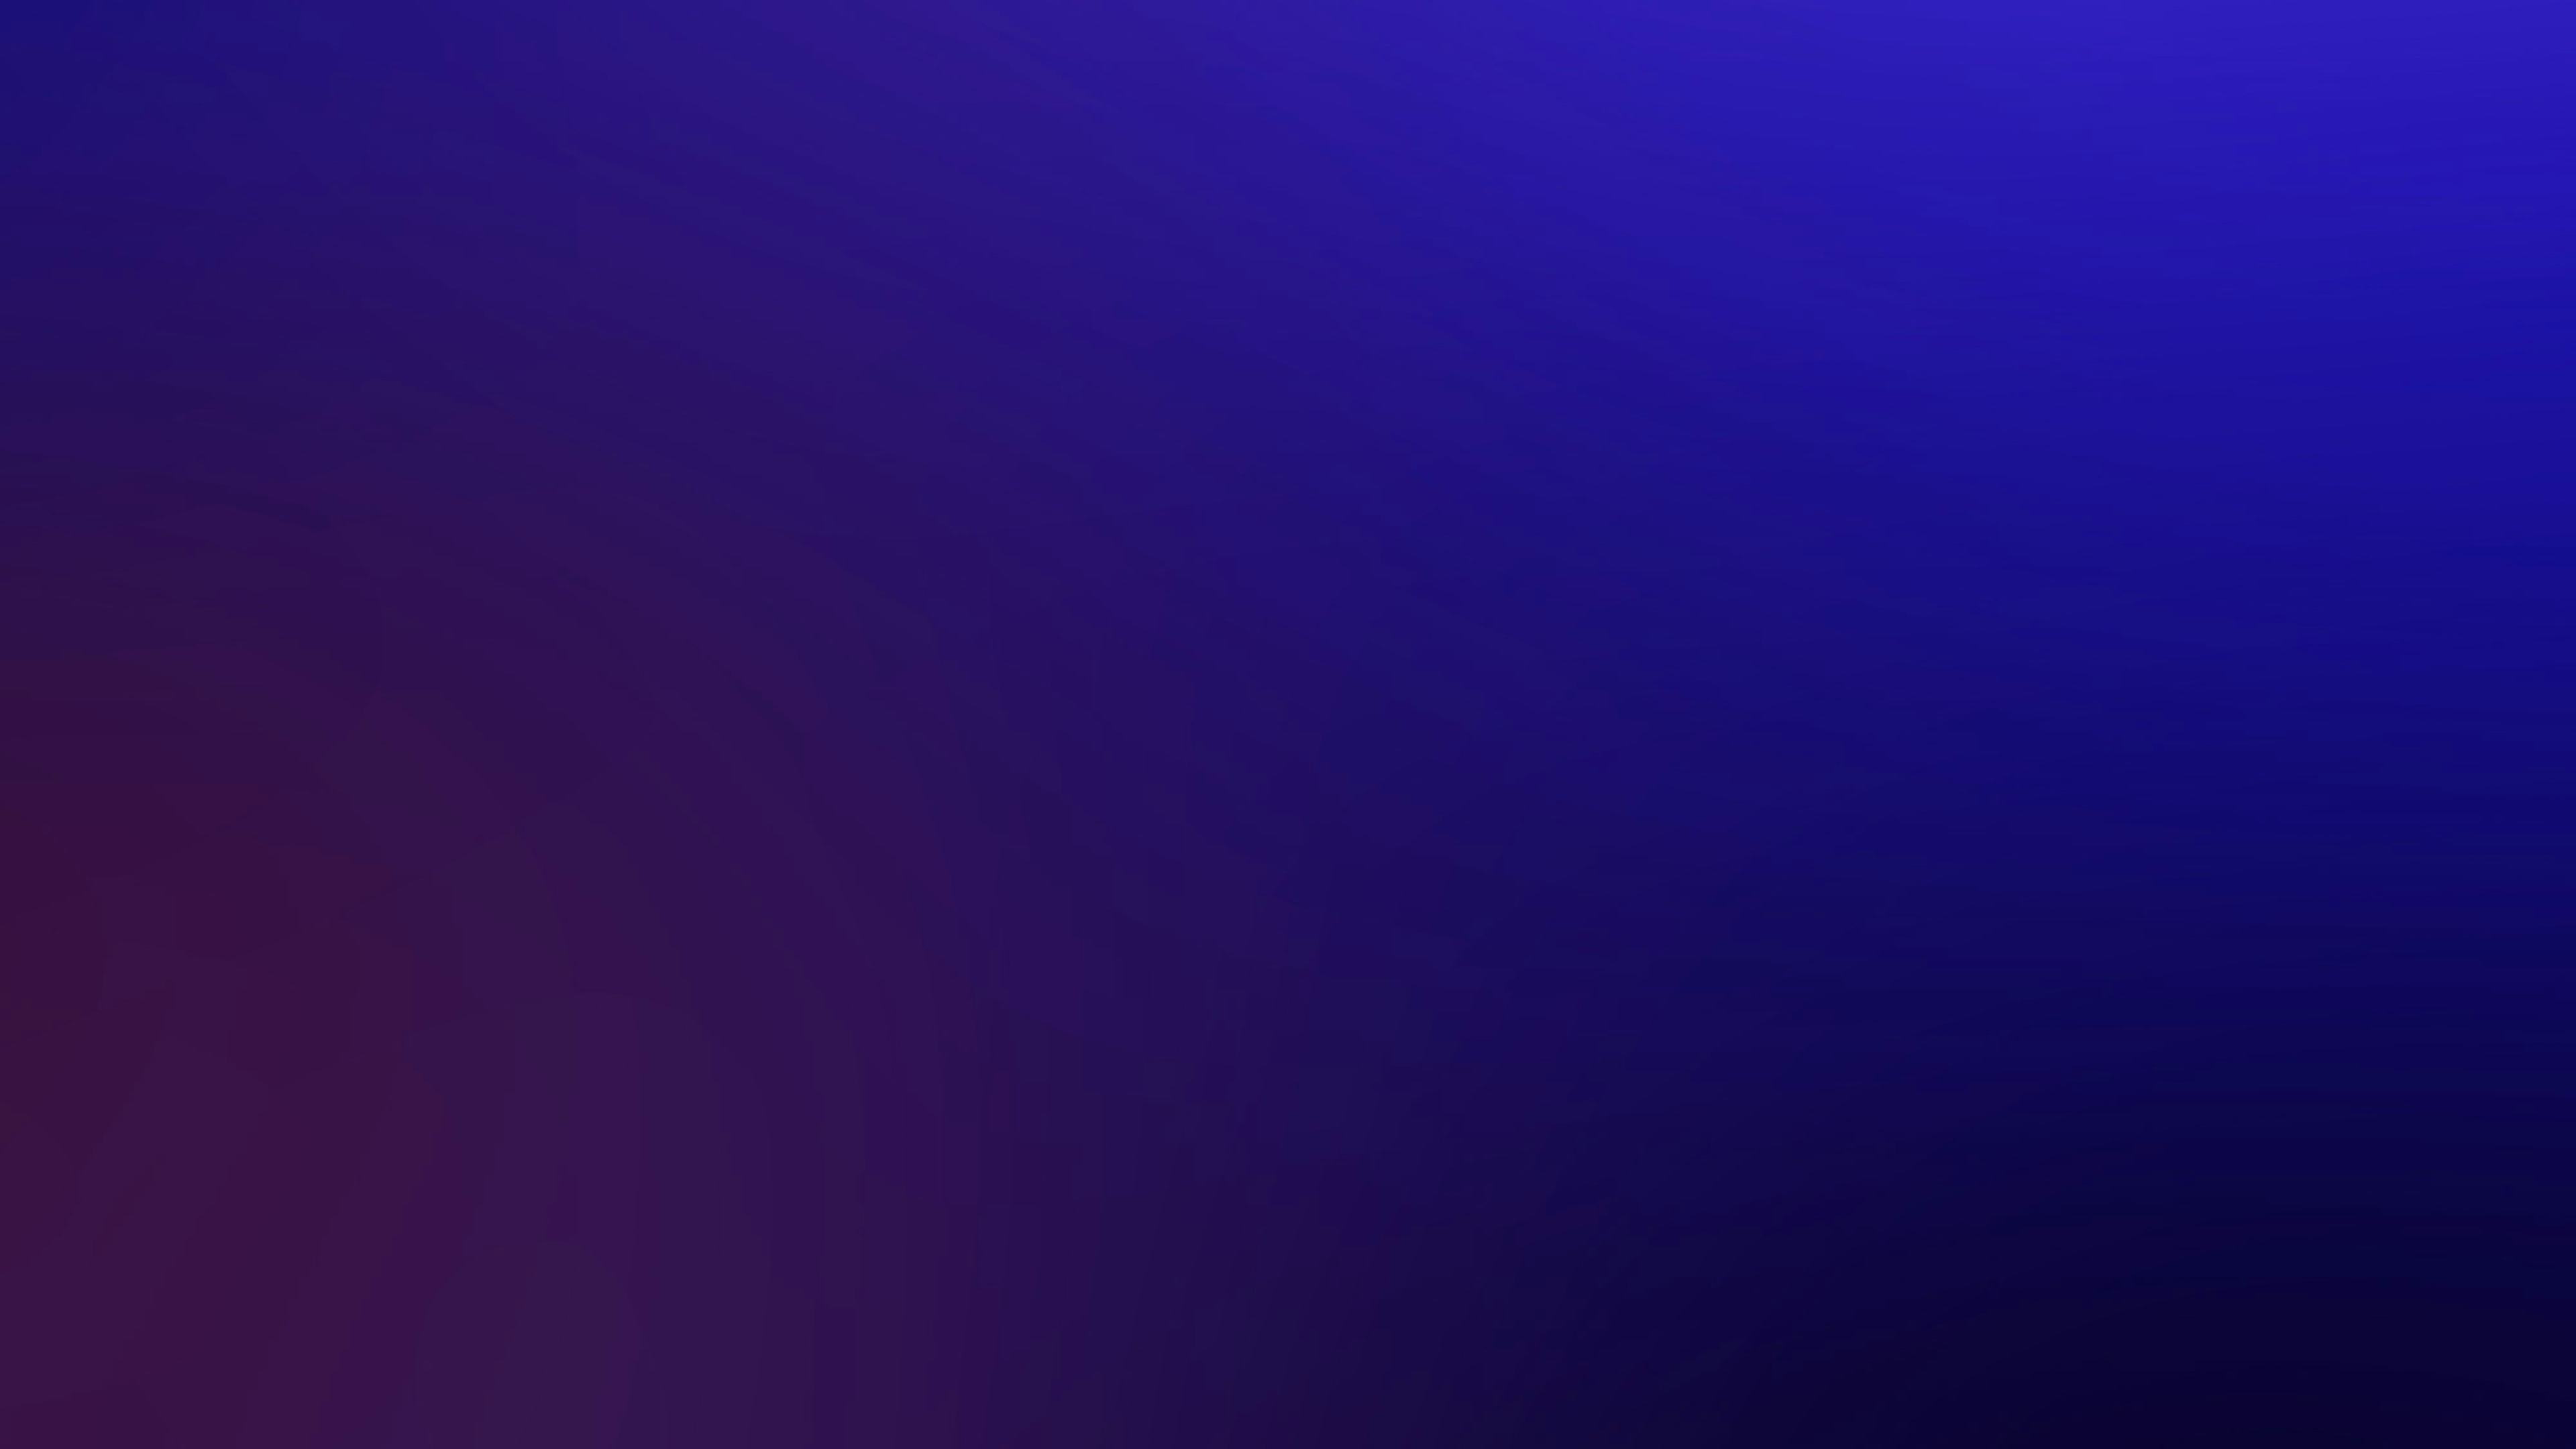 abstract blue and purple gradient background